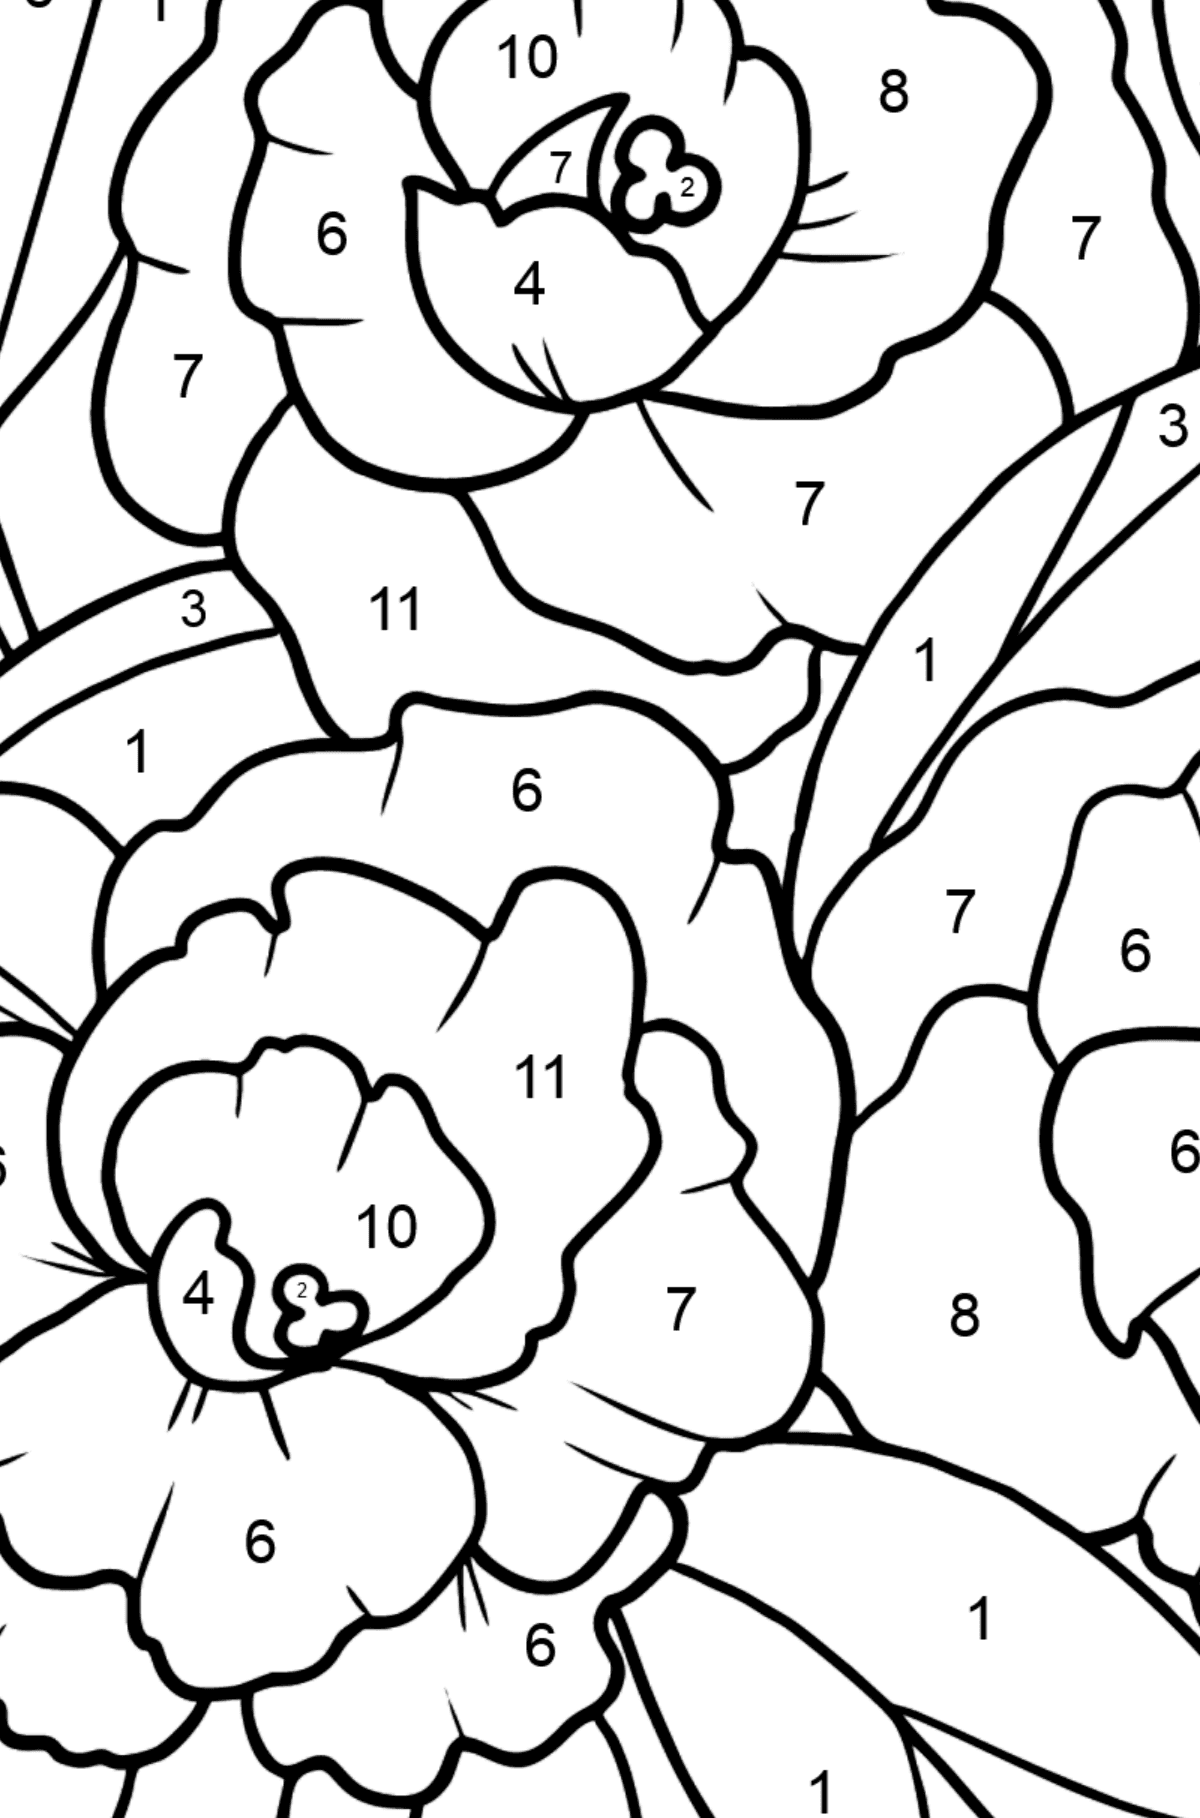 Flower Coloring Page - A Peony Blossom - Coloring by Numbers for Kids